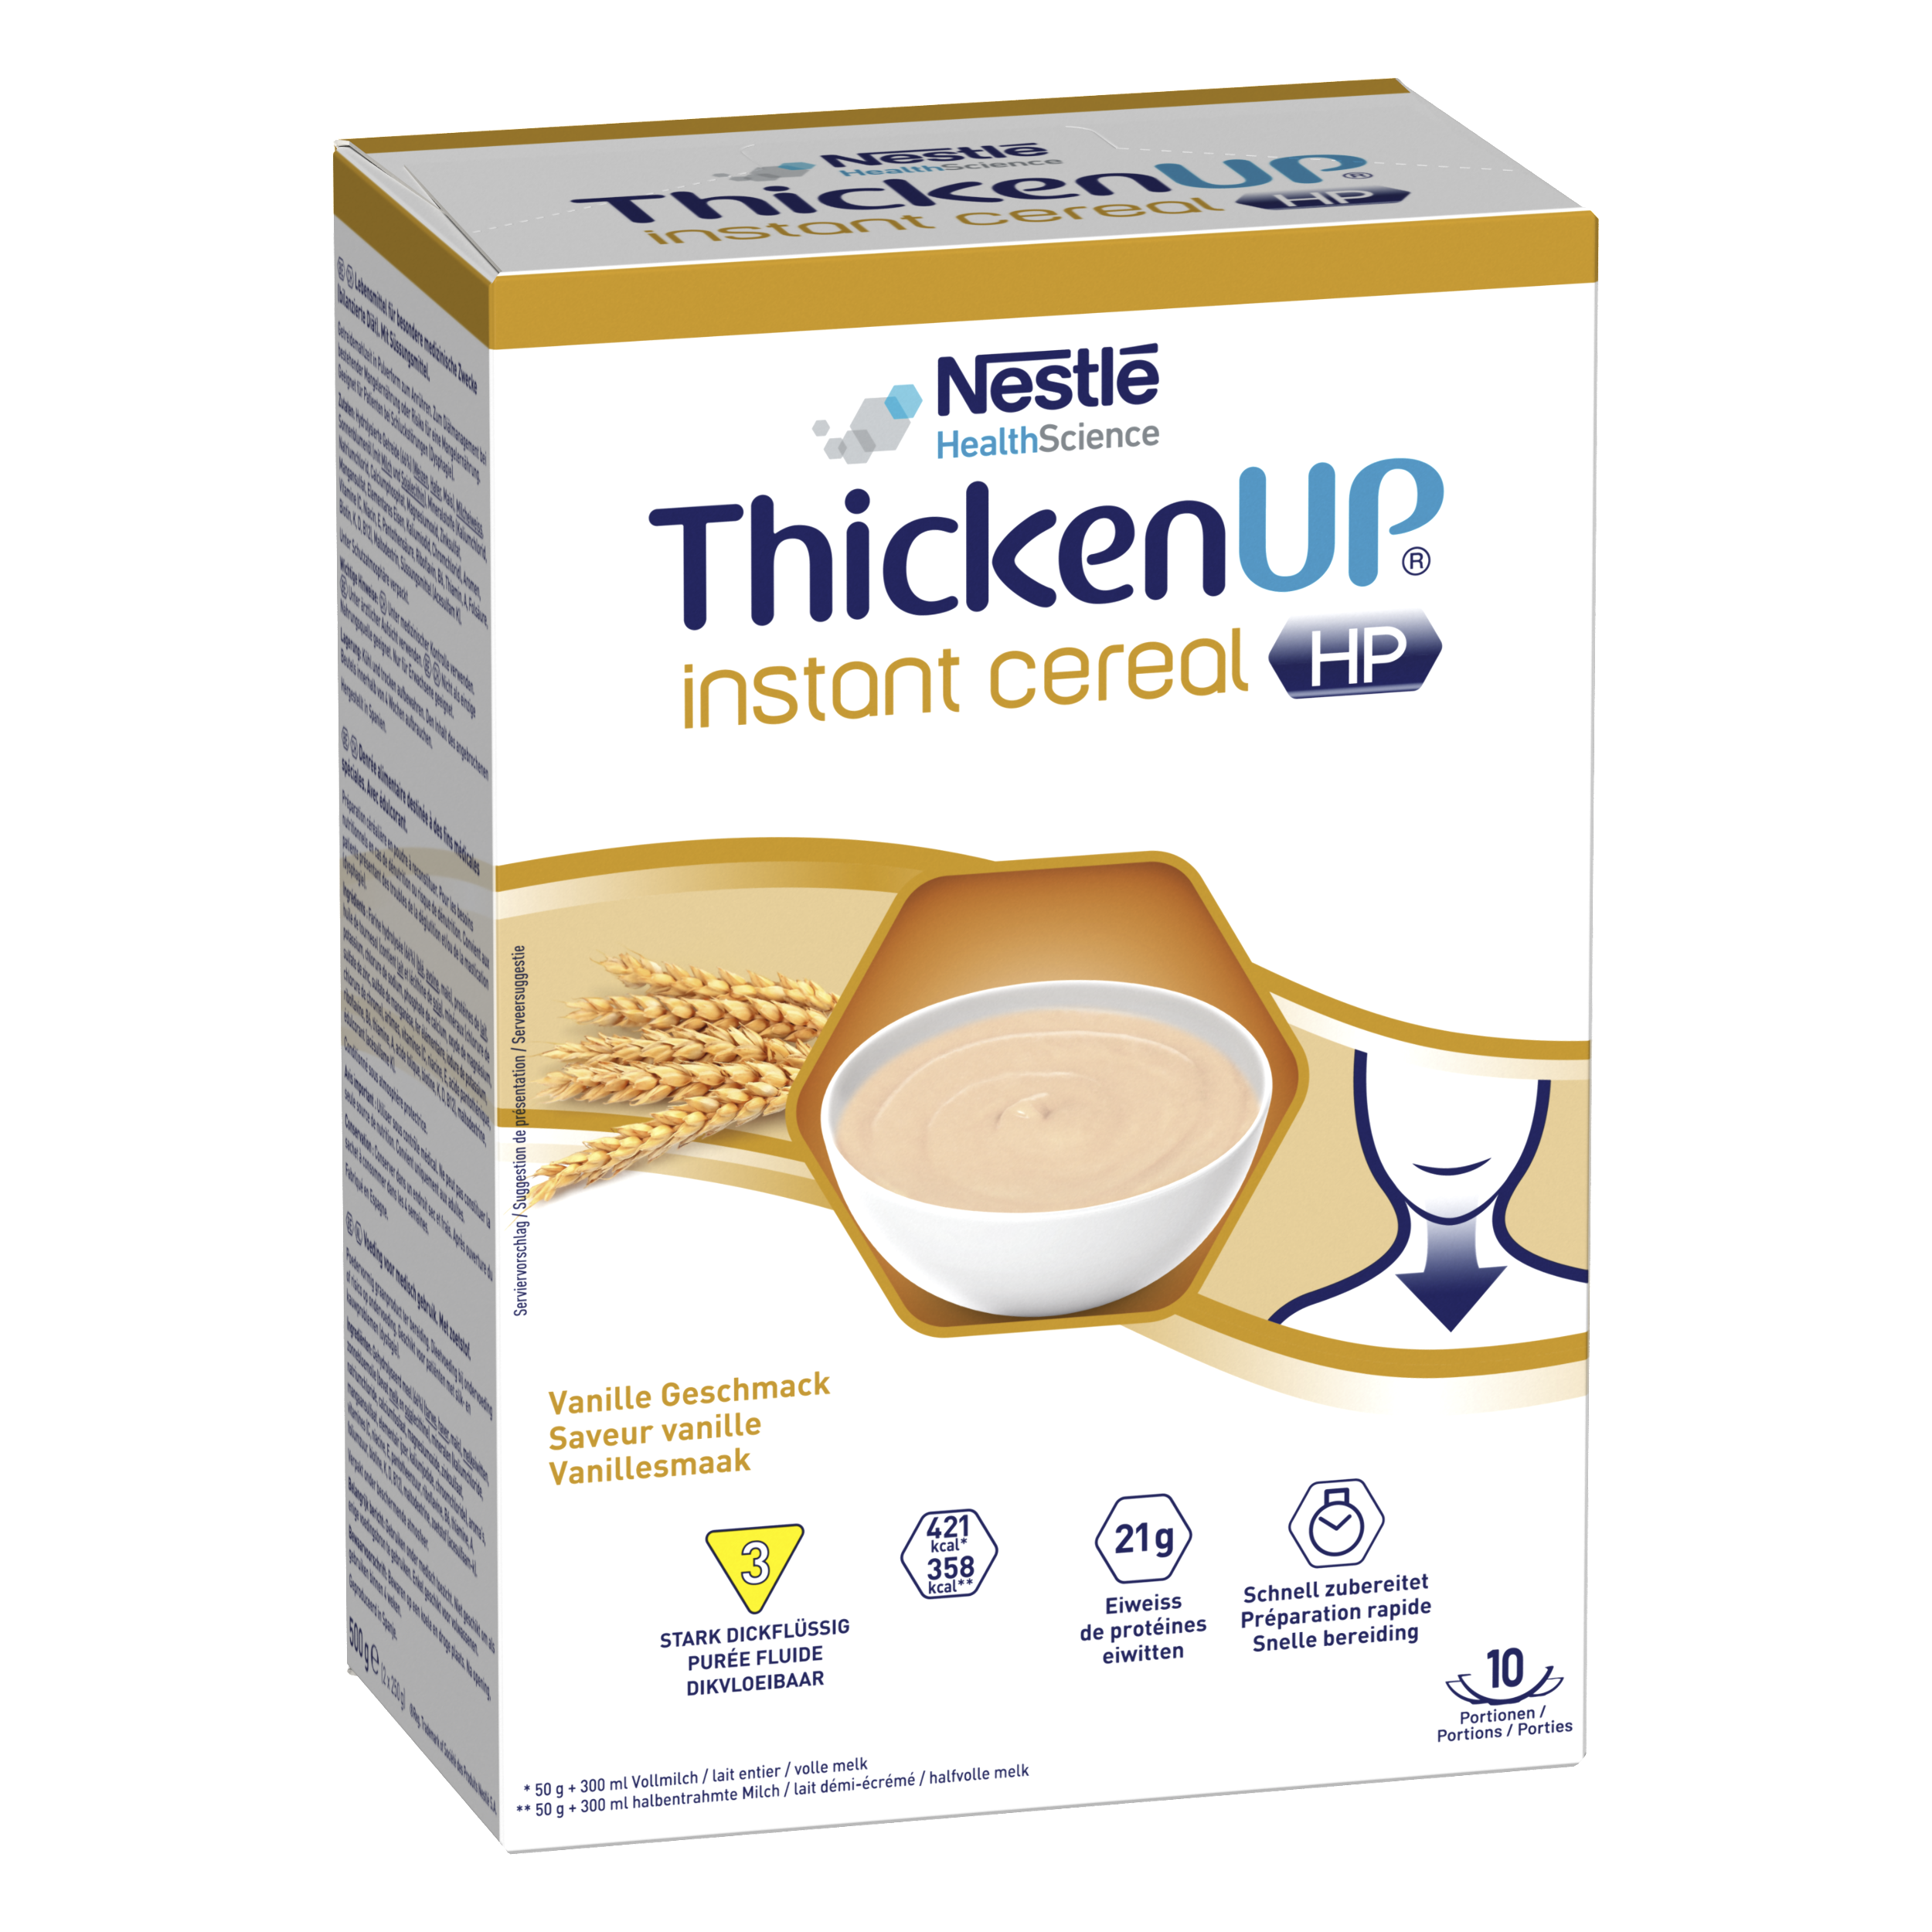 ThickenUP® instant cereal HP